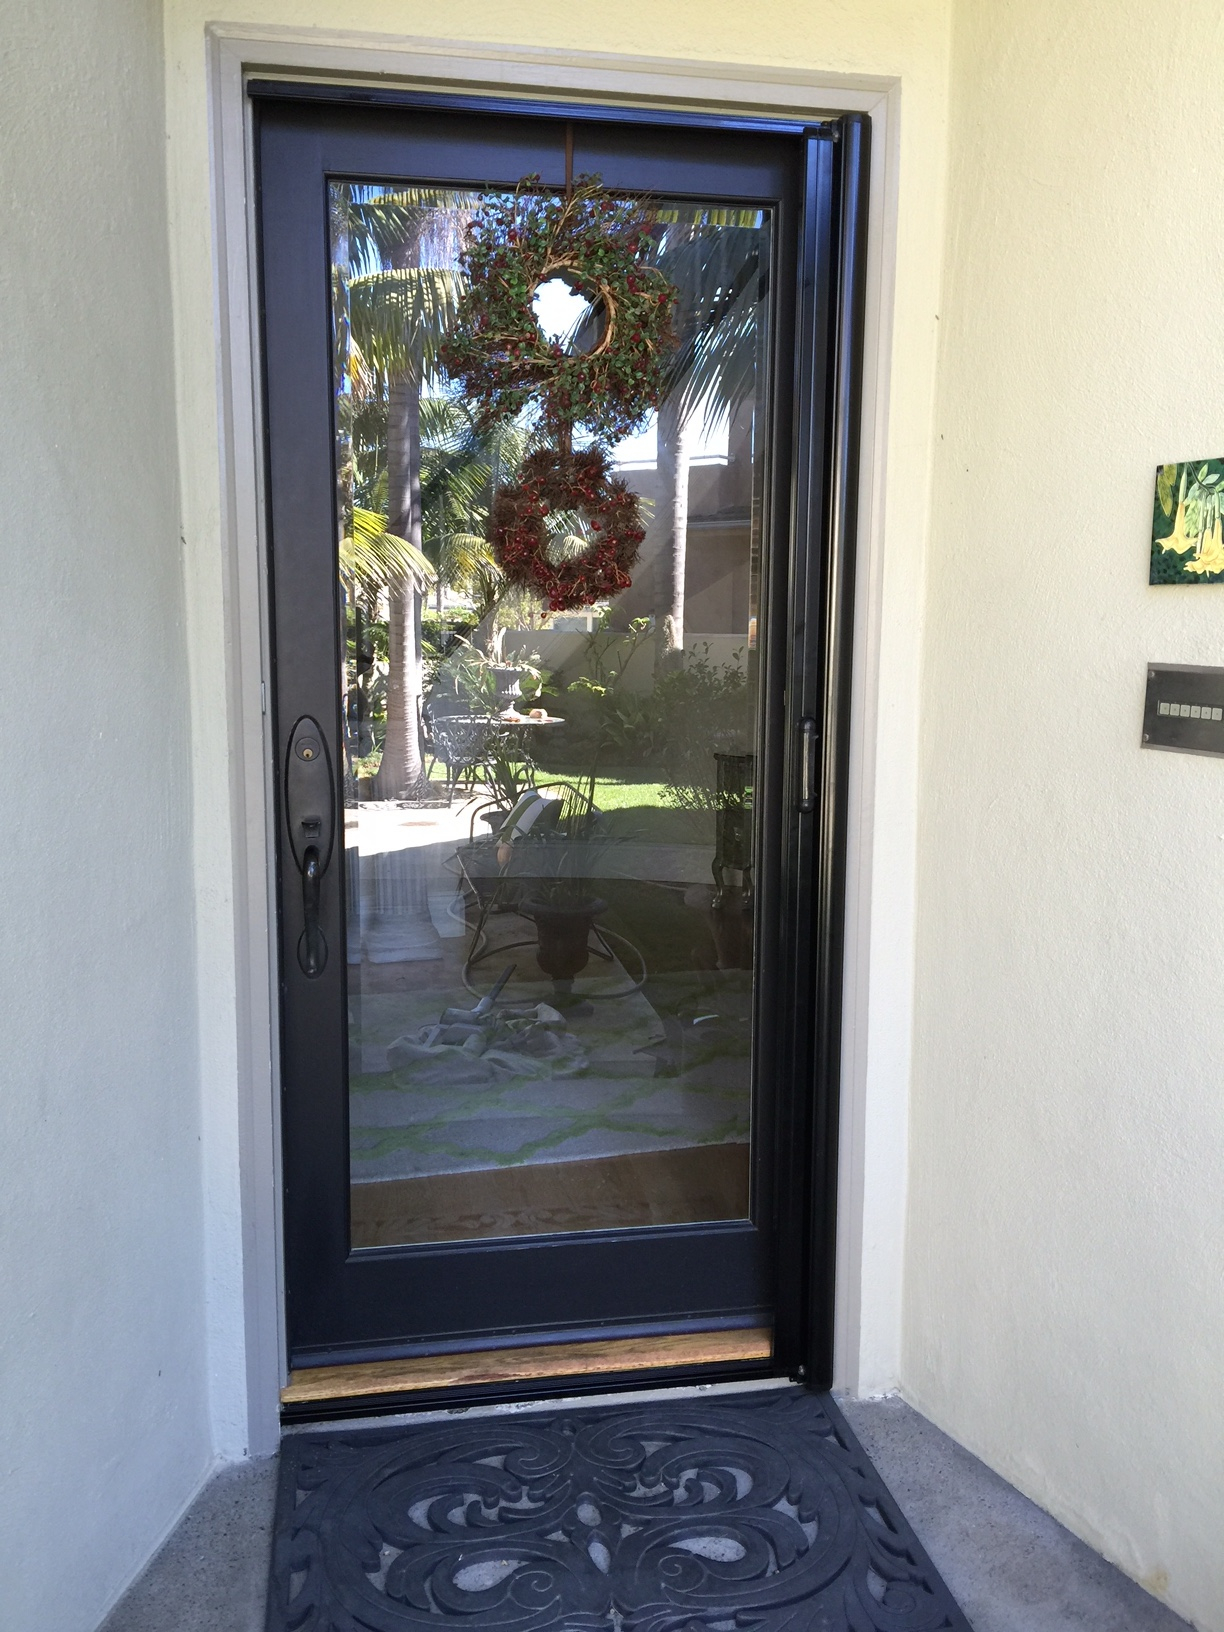 Clear View Retractable Screen Door Pictures And Recent Installations throughout measurements 1224 X 1632